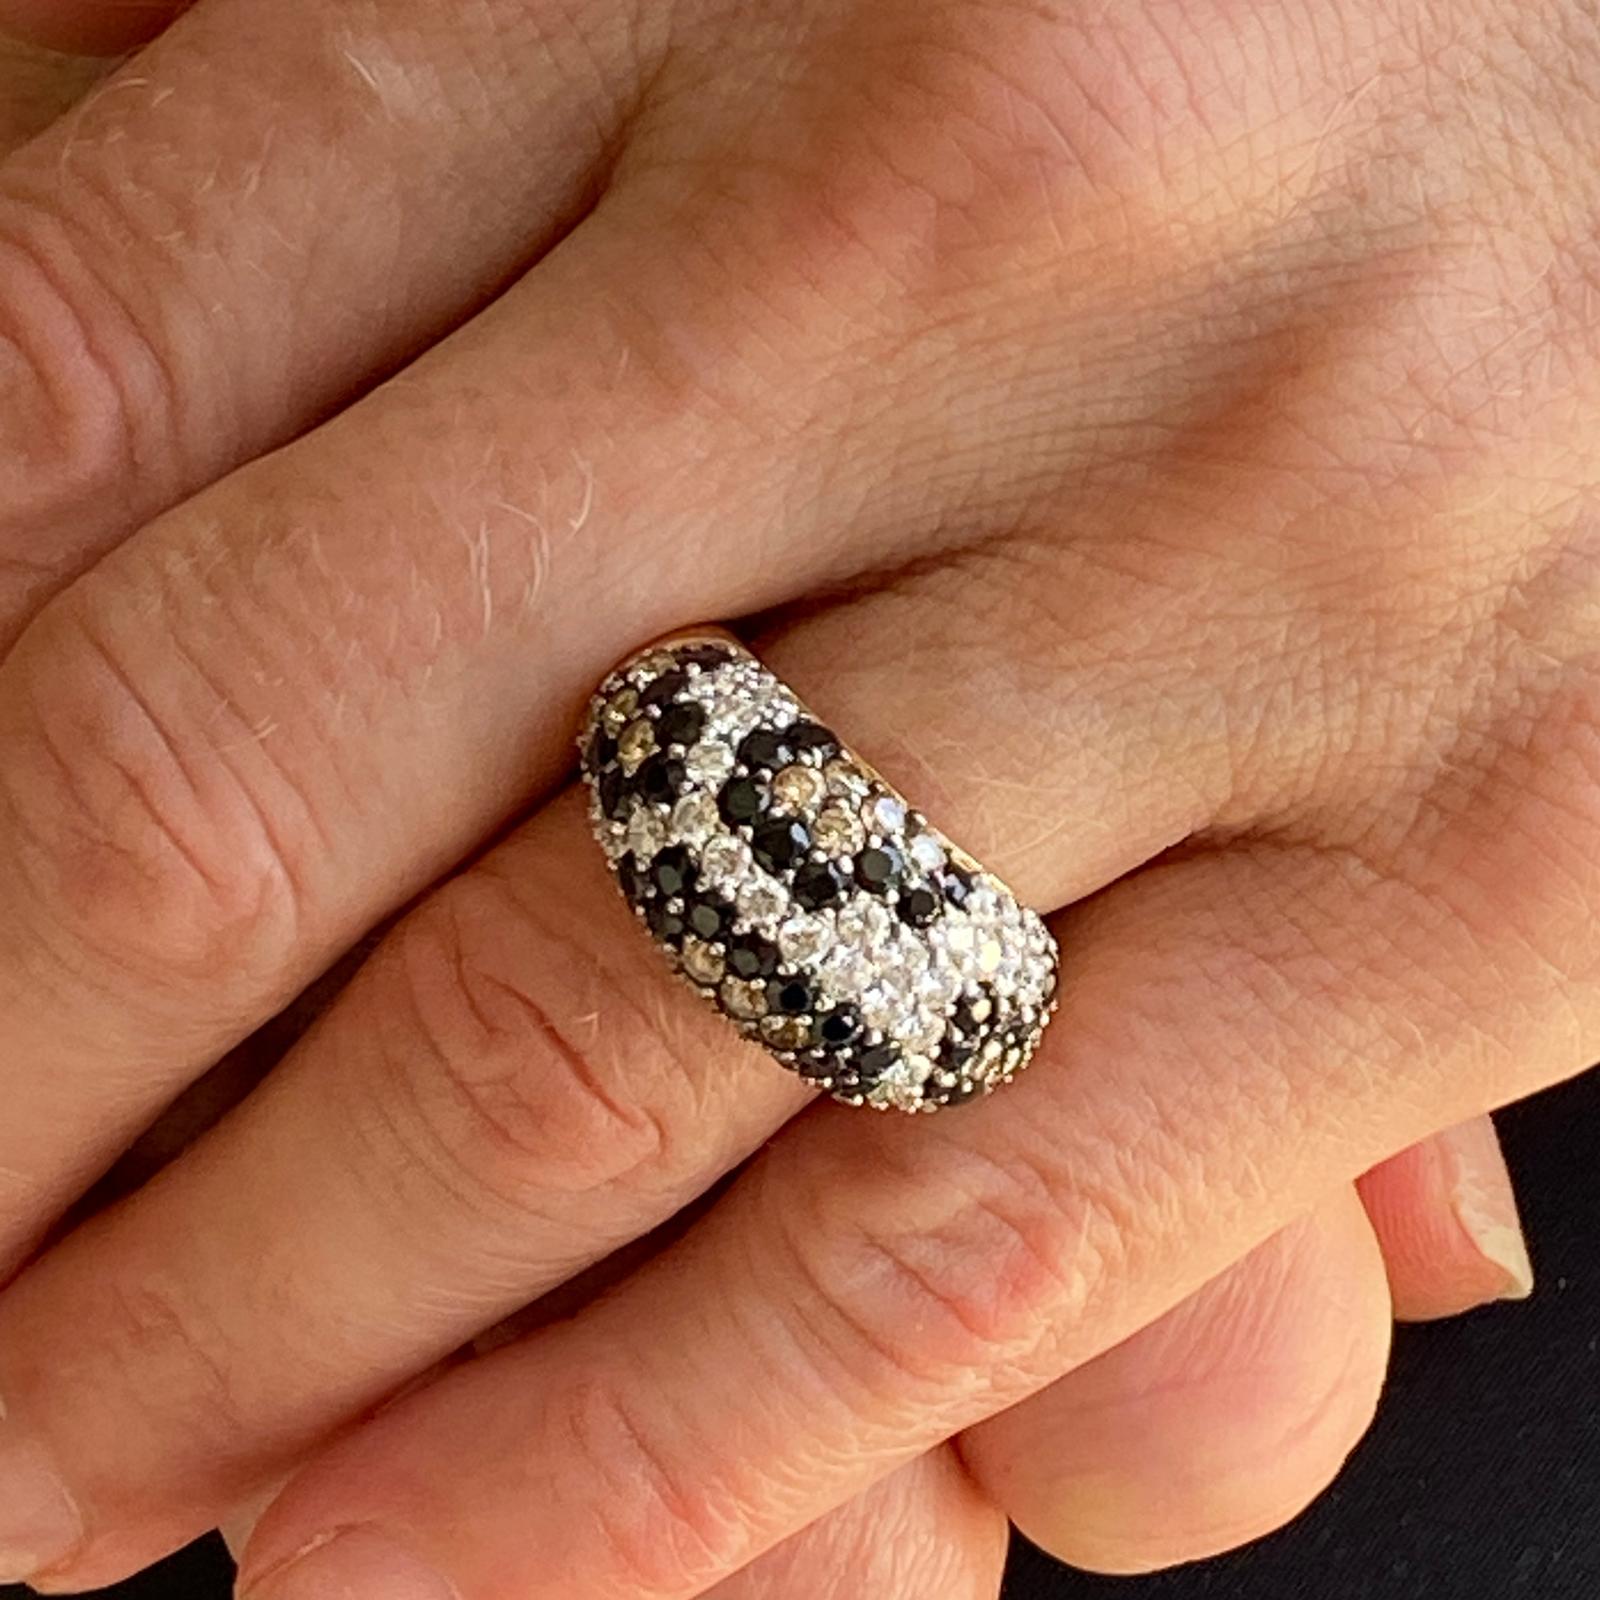 Stylish designer diamond band ring fashioned in 18 karat yellow gold. The round brilliant cut white diamonds weigh approximately 3.00 carat total weight and are graded G-H color and VS clarity. The champagne and black round brilliant cut diamonds